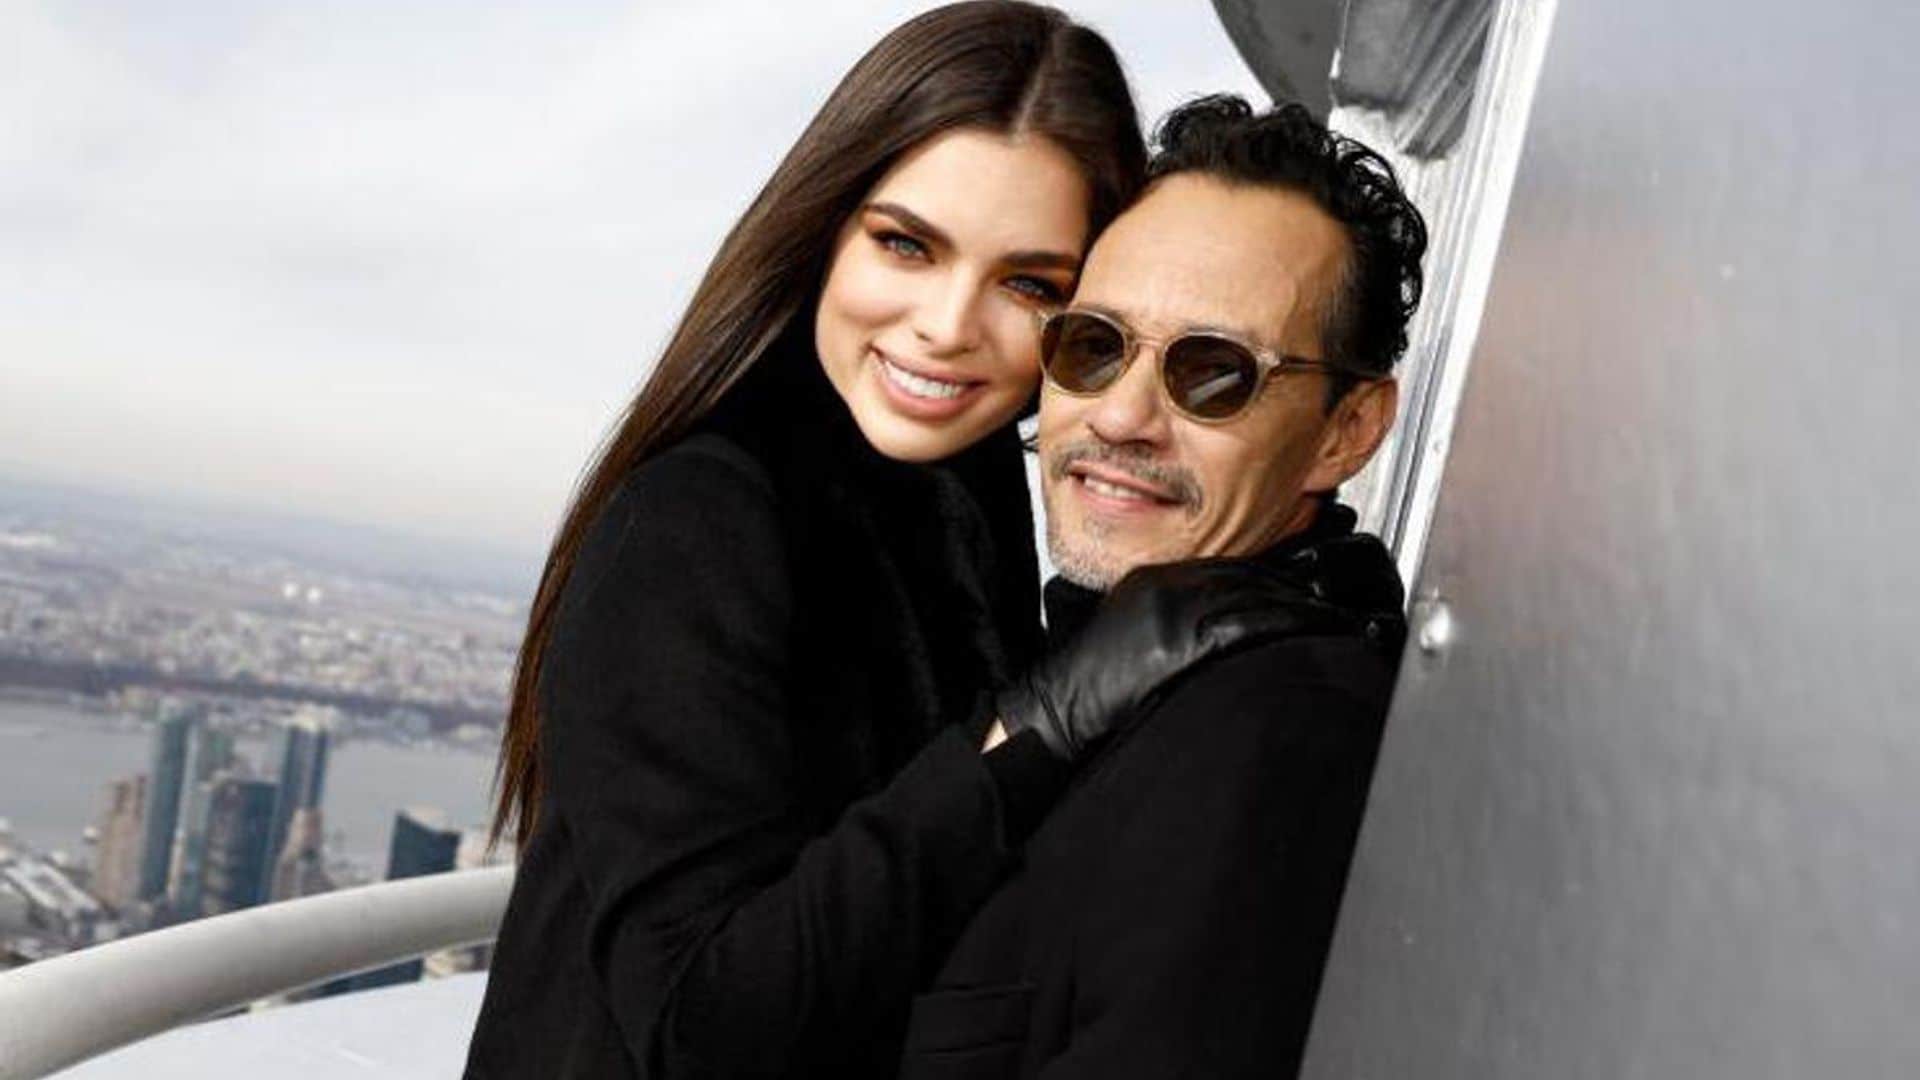 HOLA! confirms exclusive access to the upcoming wedding of Marc Anthony and Nadia Ferreira